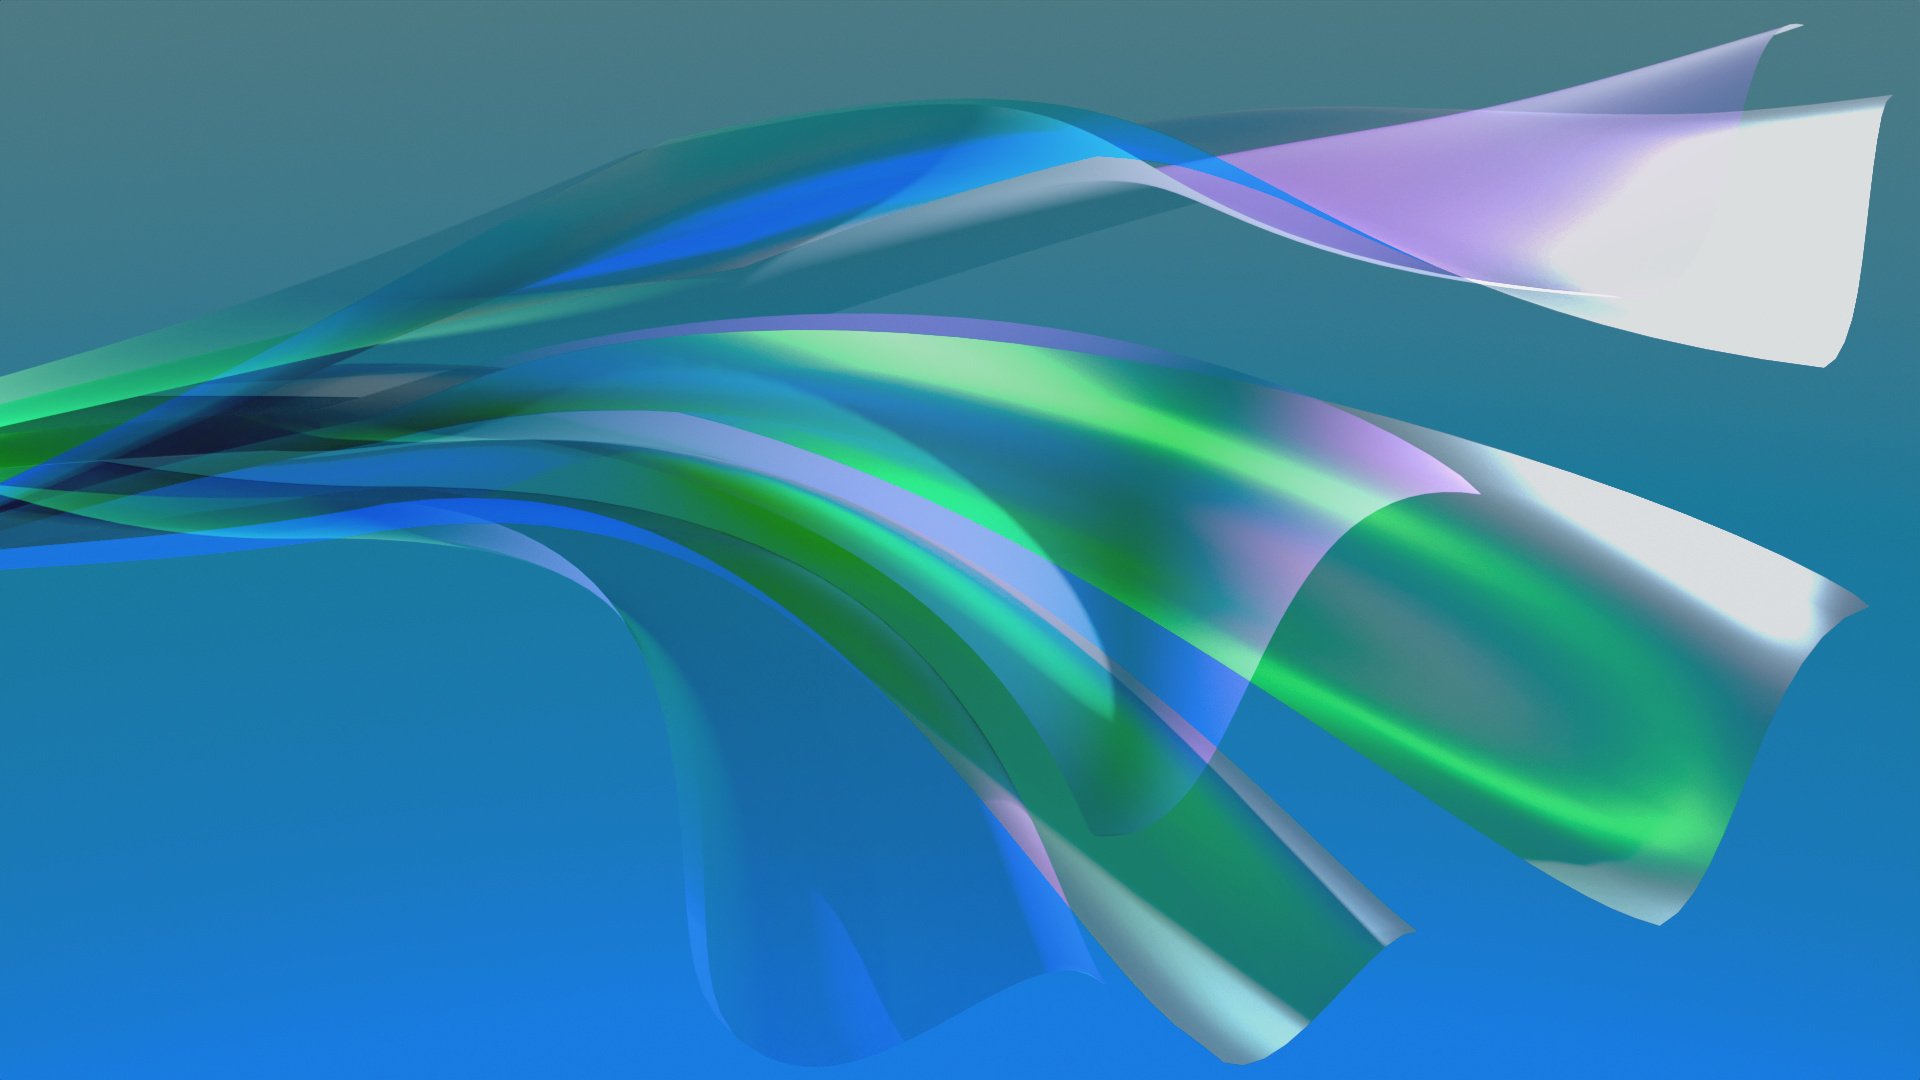 A soothing abstract 3D design that represents fluidity